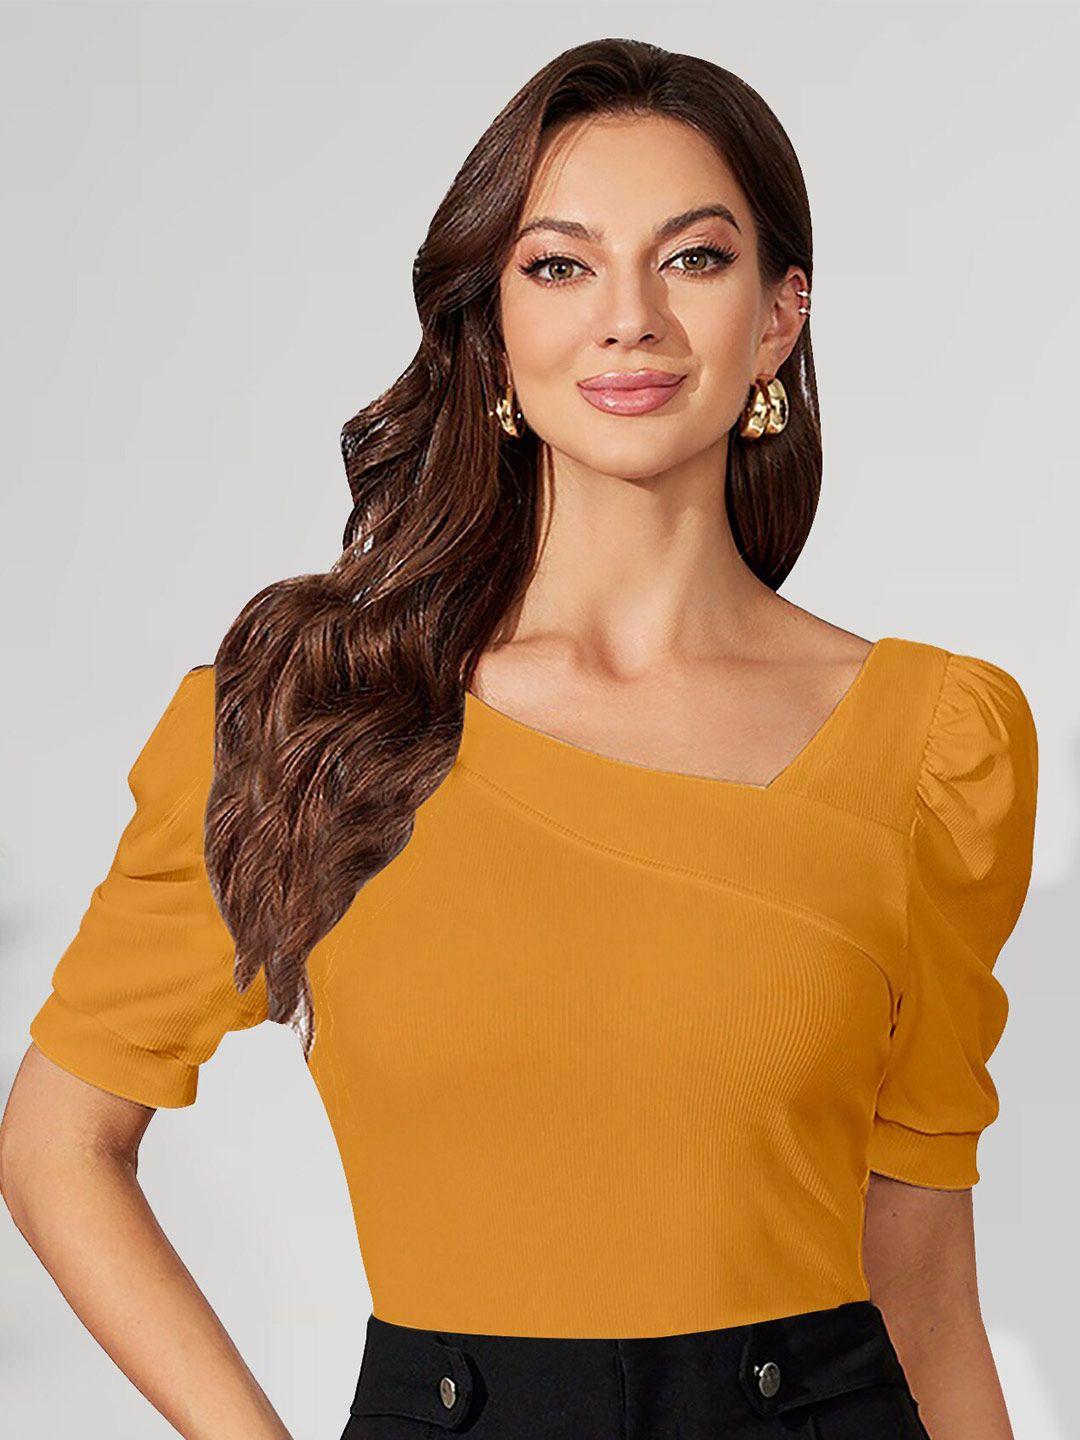 dream-beauty-fashion-asymmetric-neck-puffed-sleeves-ribbed-top